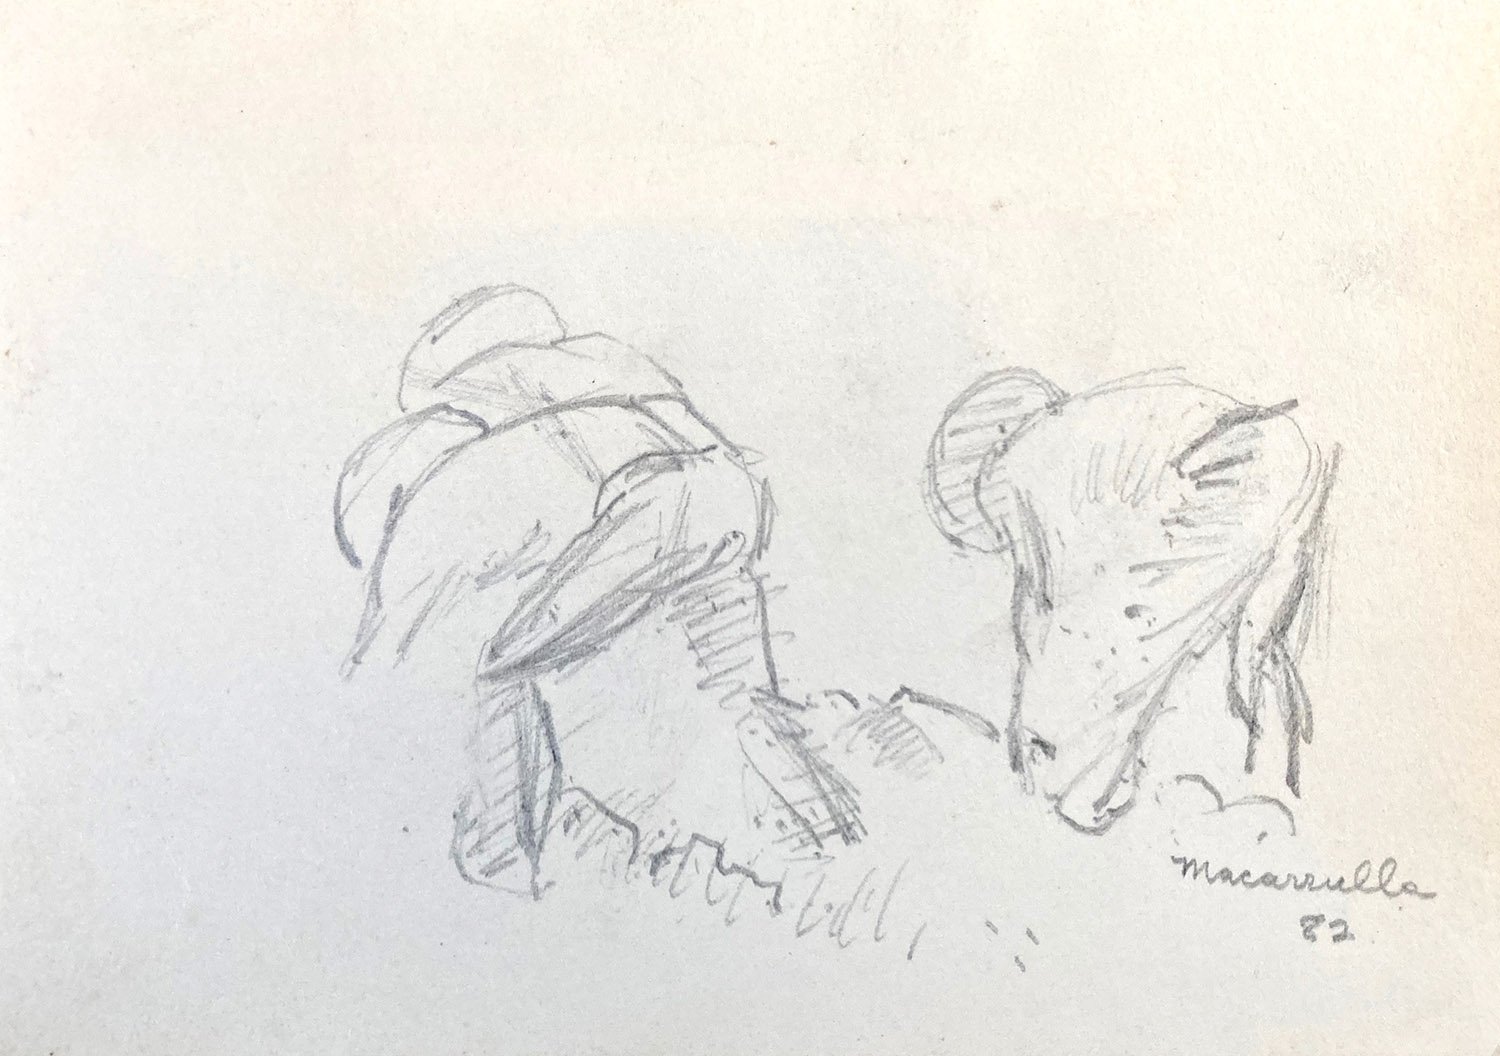    Construction workers in the field,   1982. Pencil. 5” X 4”. 